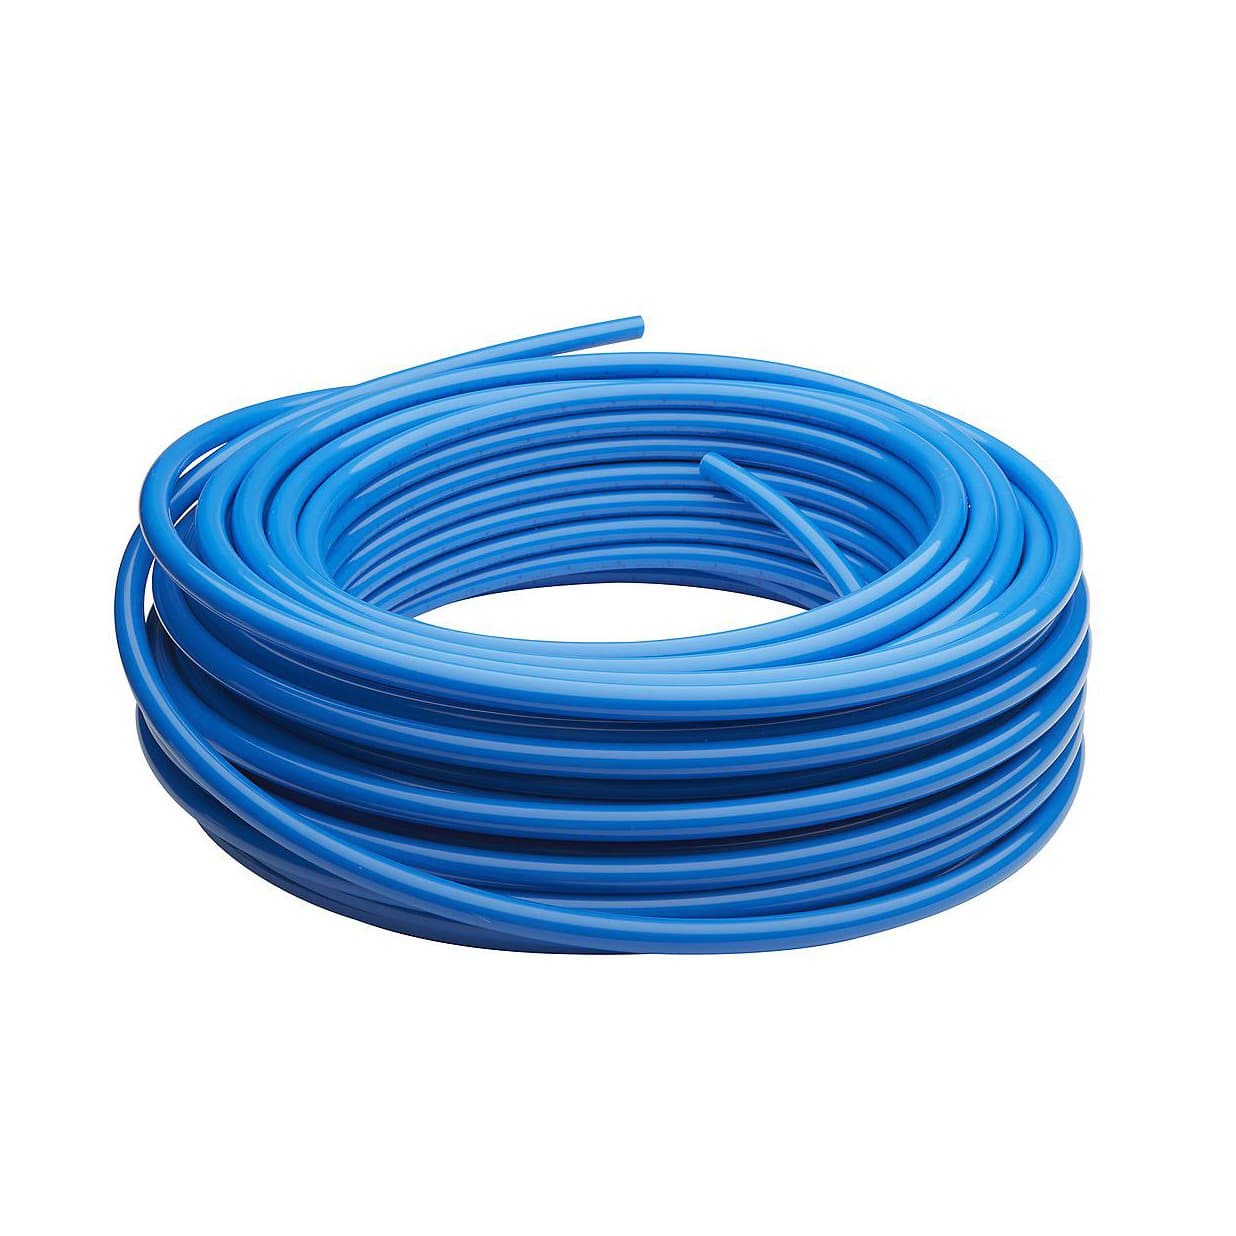 Whale WX7162B Quick Connect X Tubing, Blue 15mm